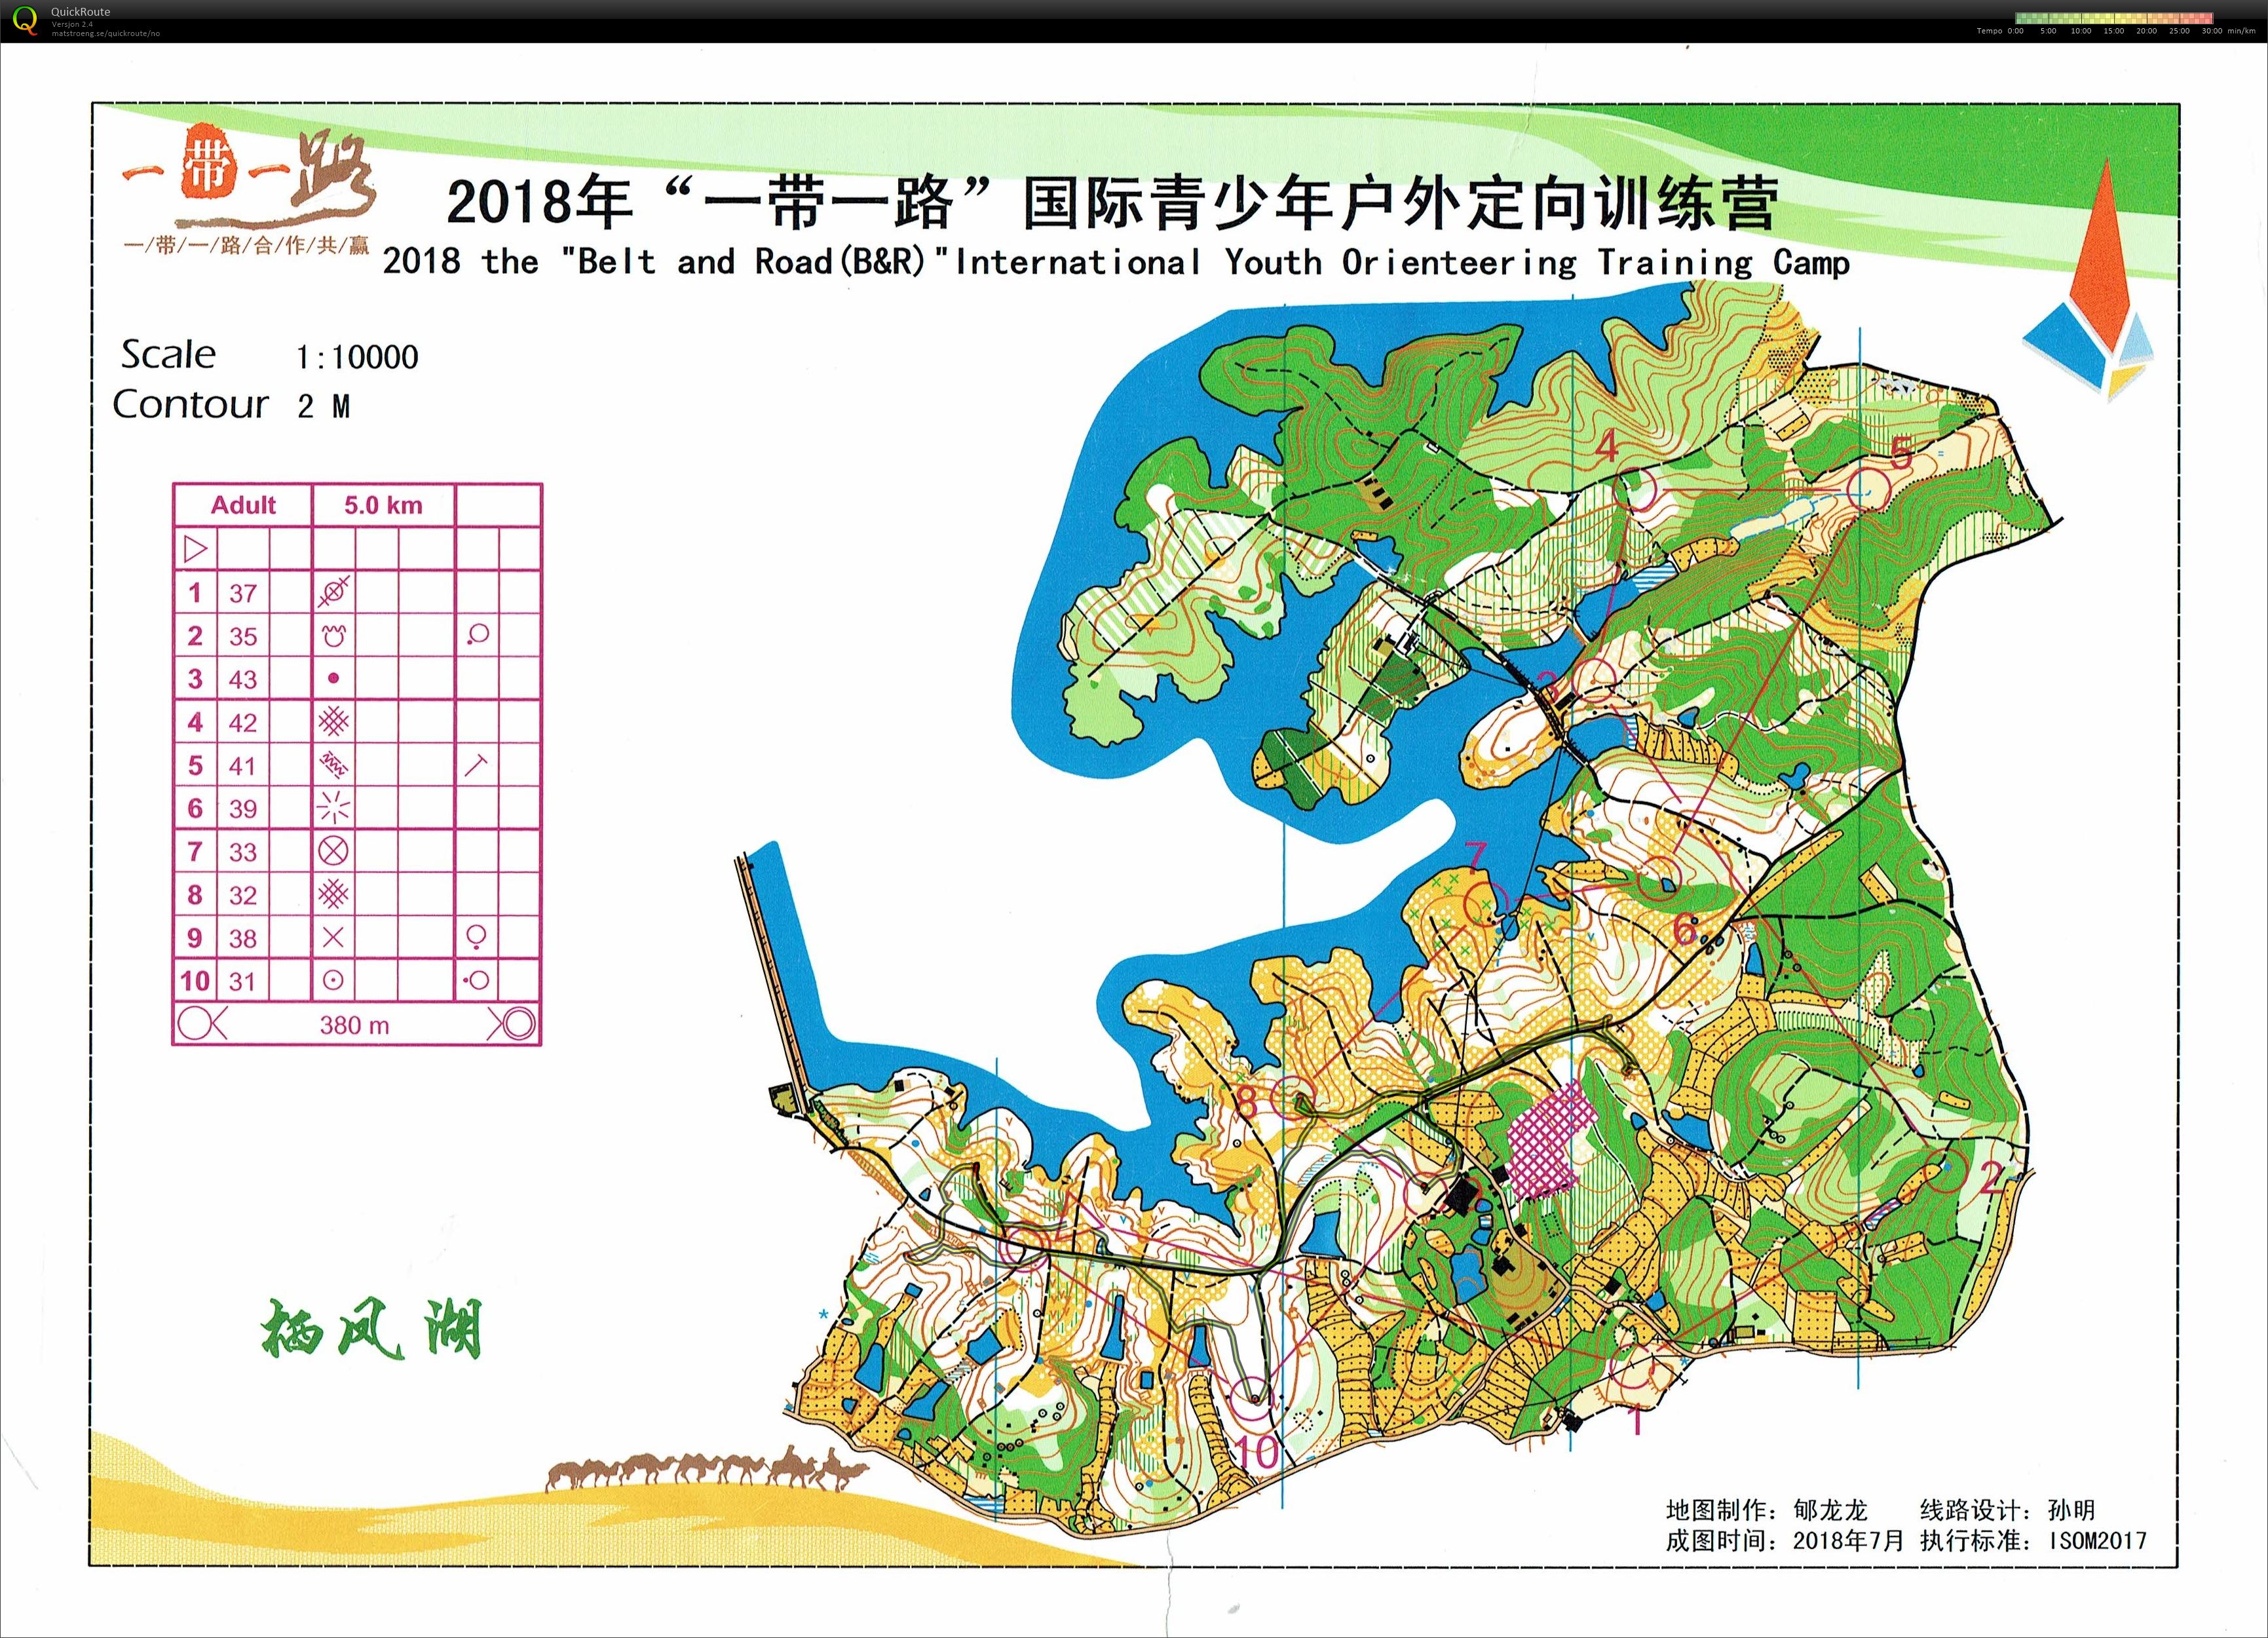 Belt and Road International Youth Orienteering Camp (26-10-2018)